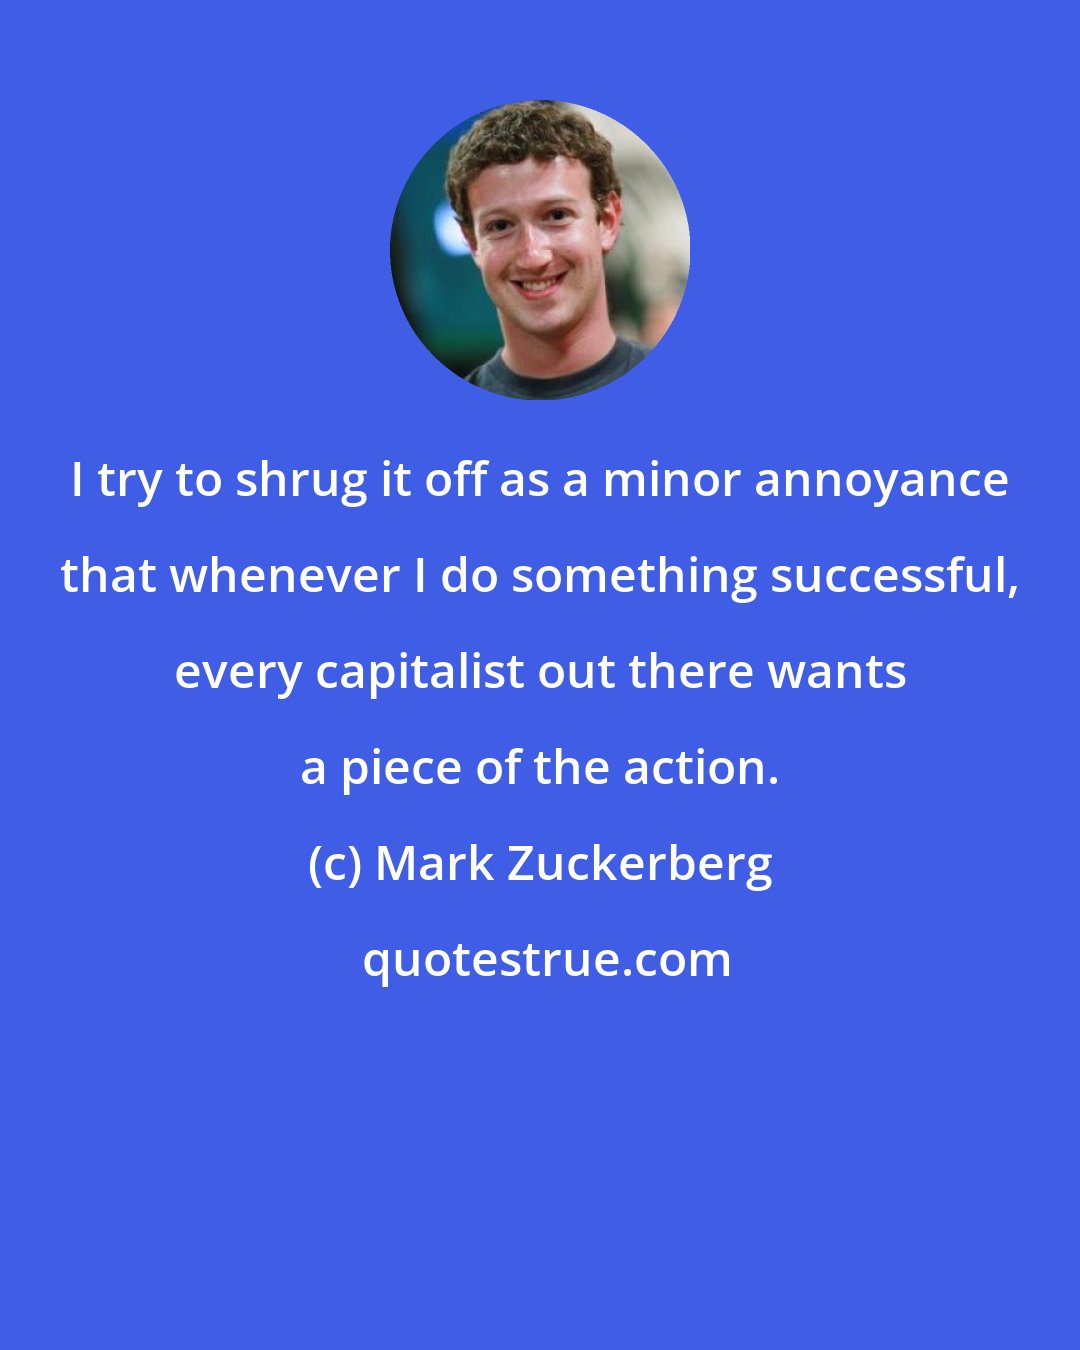 Mark Zuckerberg: I try to shrug it off as a minor annoyance that whenever I do something successful, every capitalist out there wants a piece of the action.